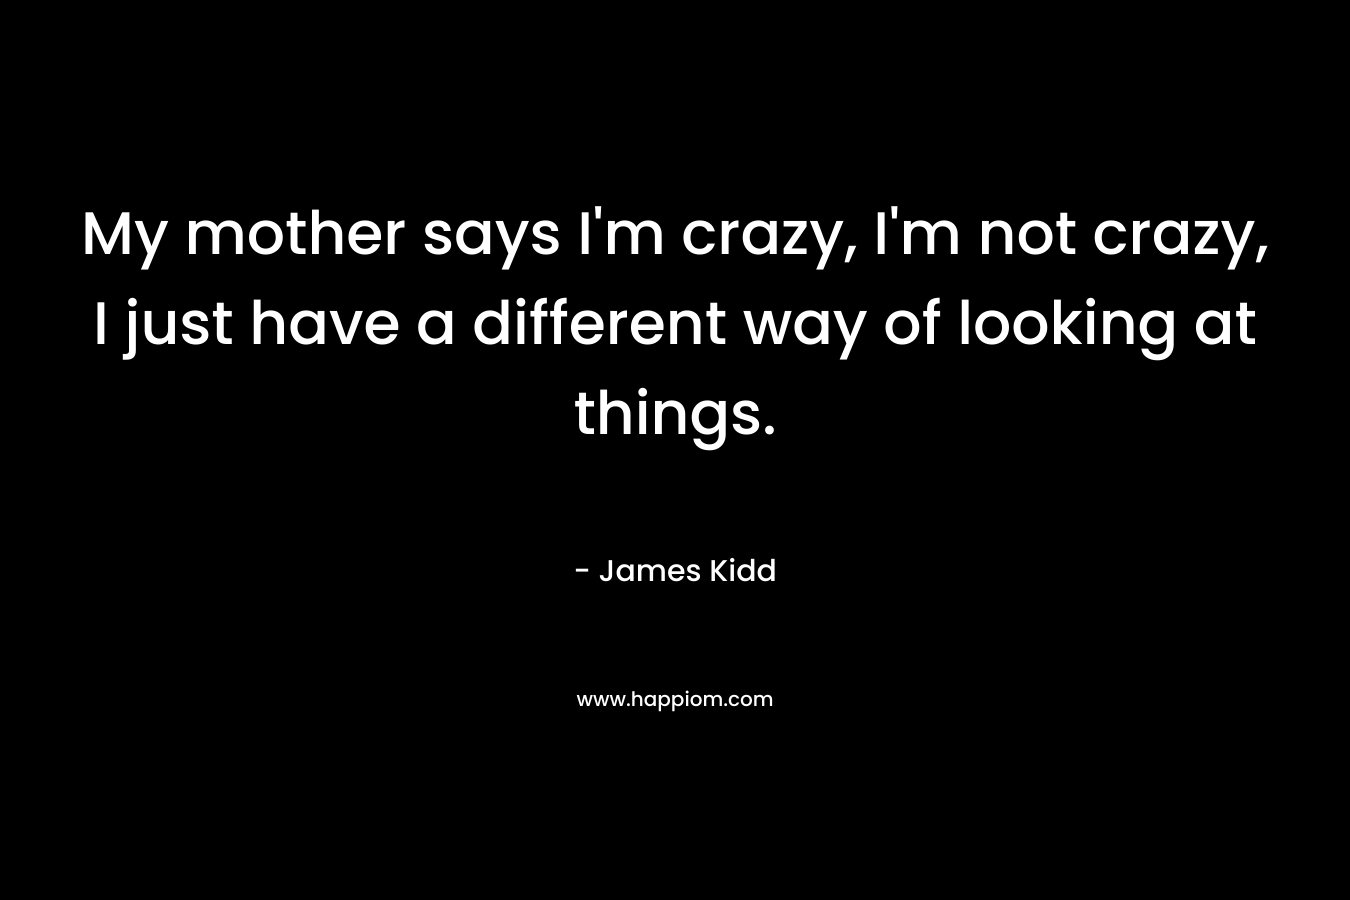 My mother says I’m crazy, I’m not crazy, I just have a different way of looking at things. – James Kidd